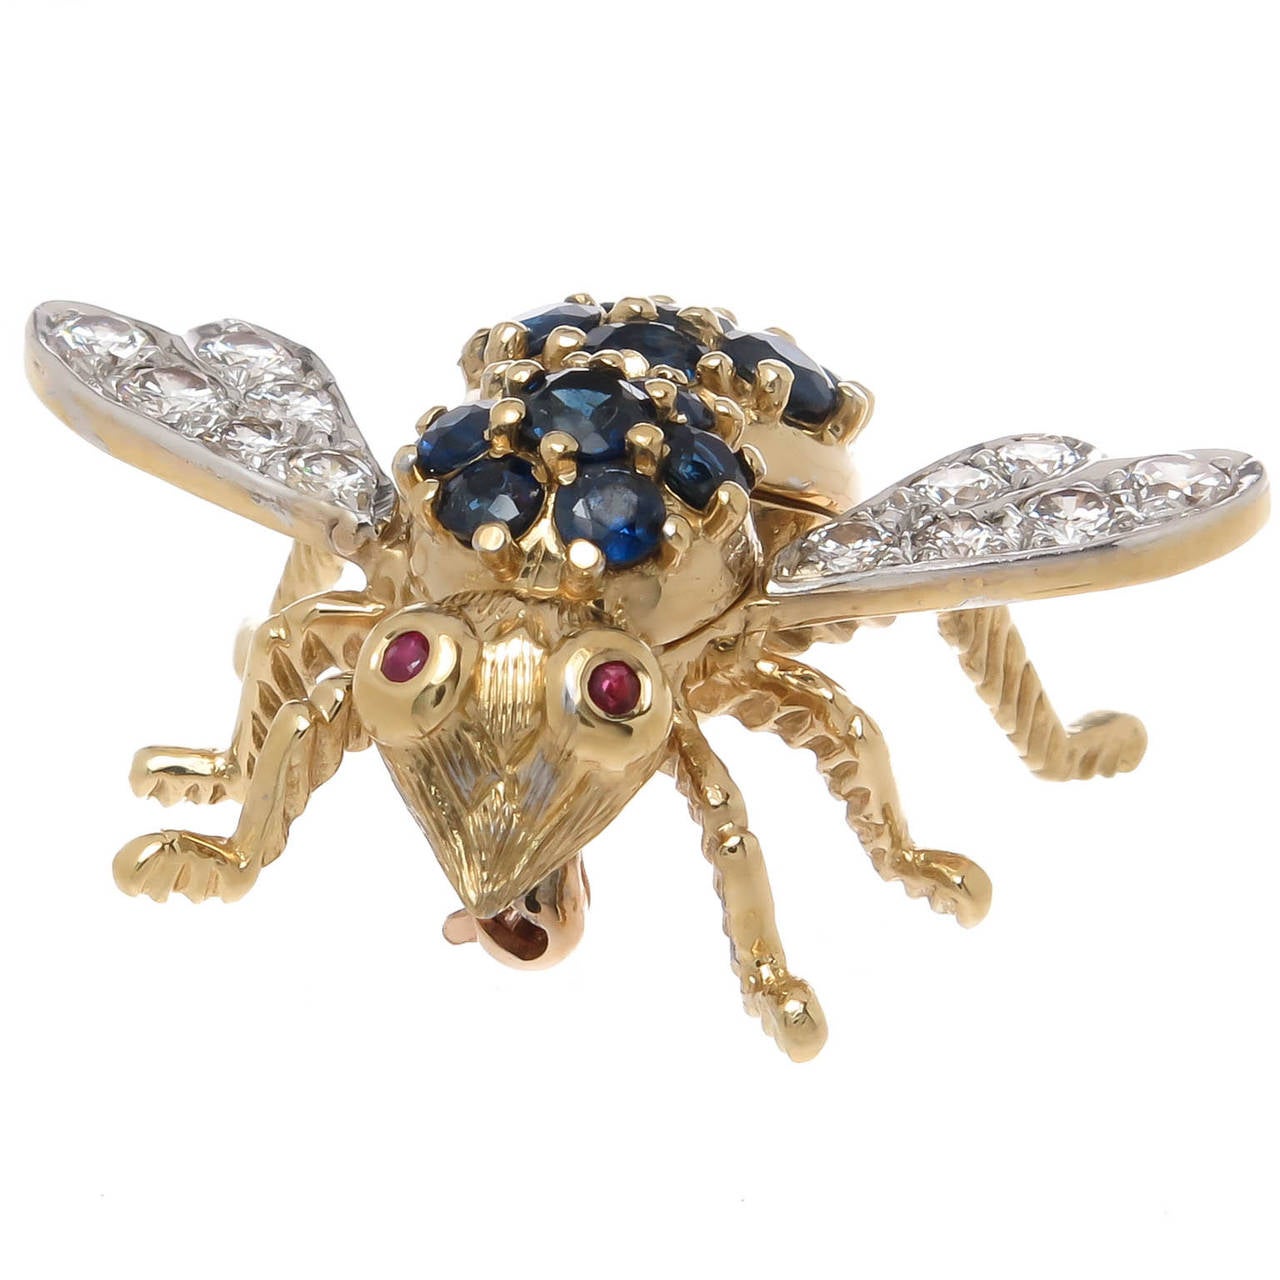 Circa 1970s Herbert Rosenthal bee brooch. 18K yellow gold and set with round brilliant cut diamonds totaling .70 carat and grading as F-G in color and VVS in clarity. Further set with fine color blue sapphires and having ruby eyes.